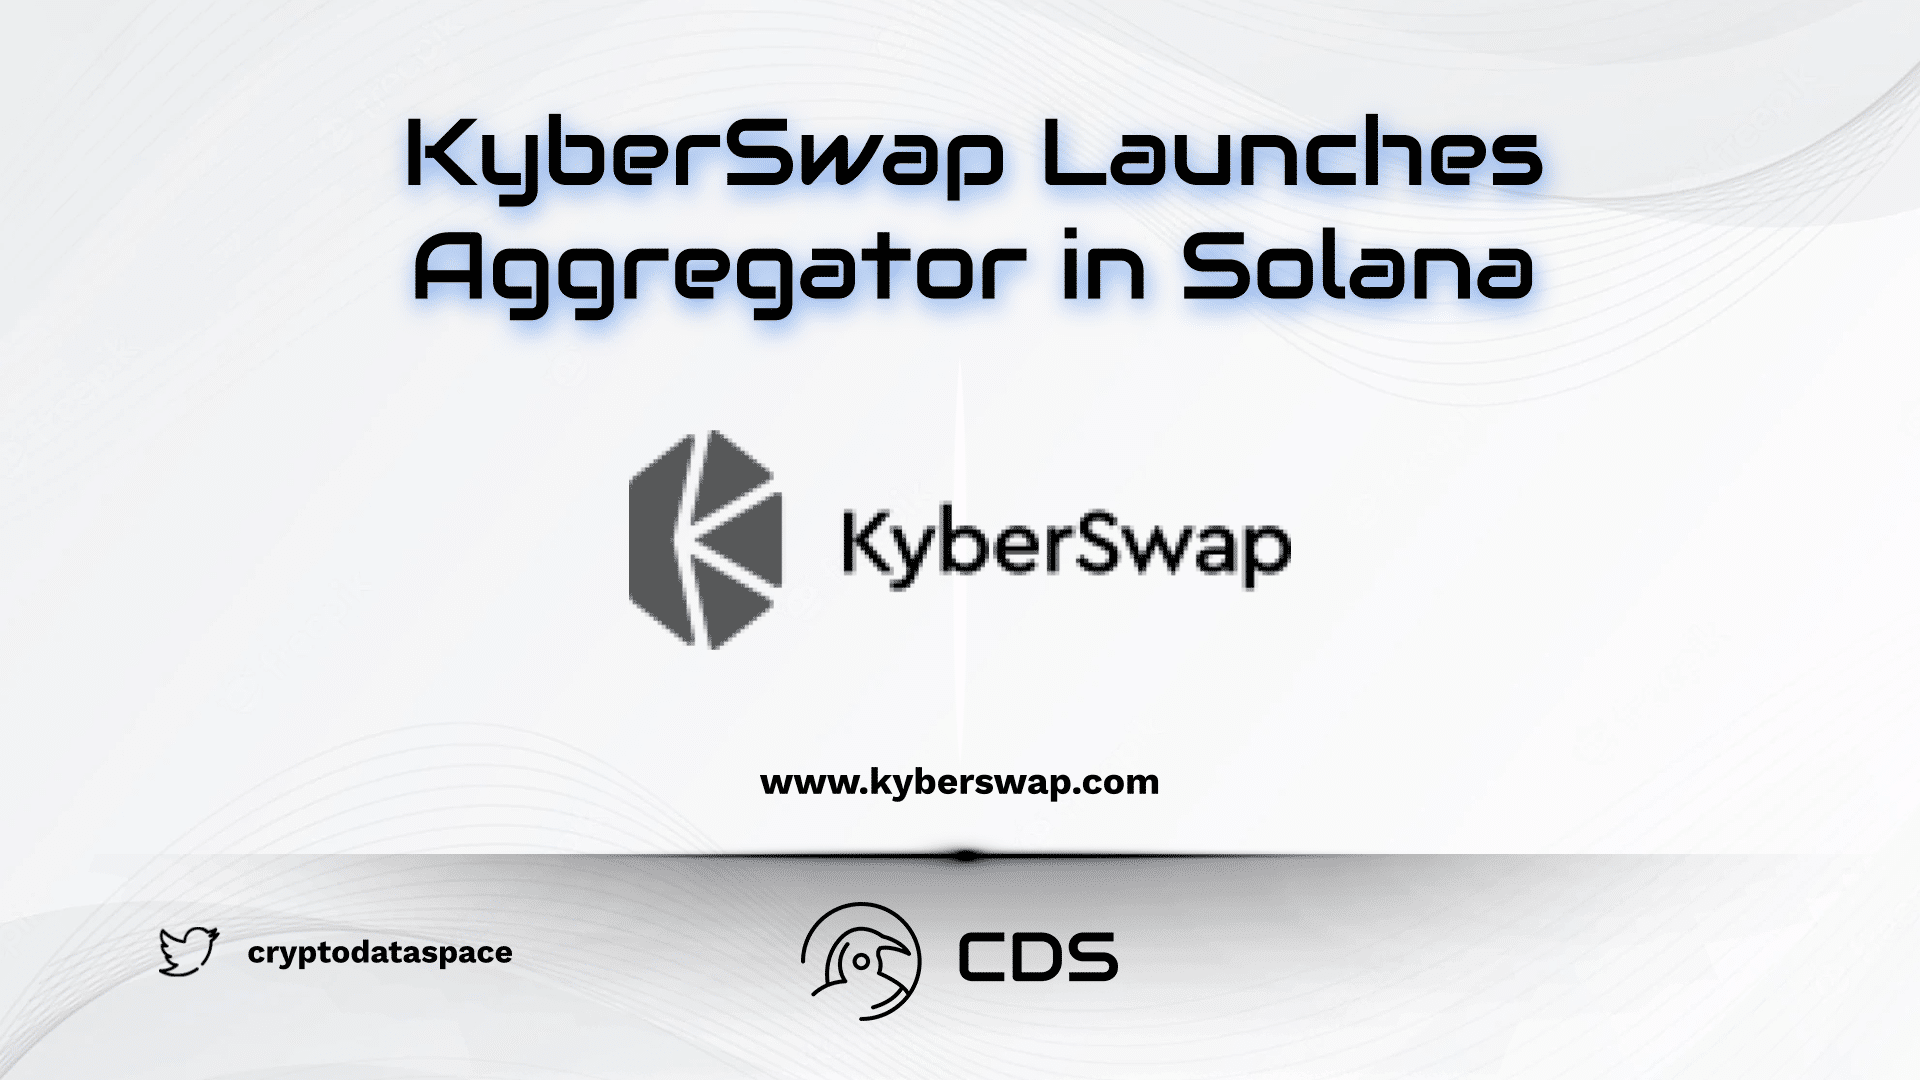 KyberSwap Launches Aggregator in Solana